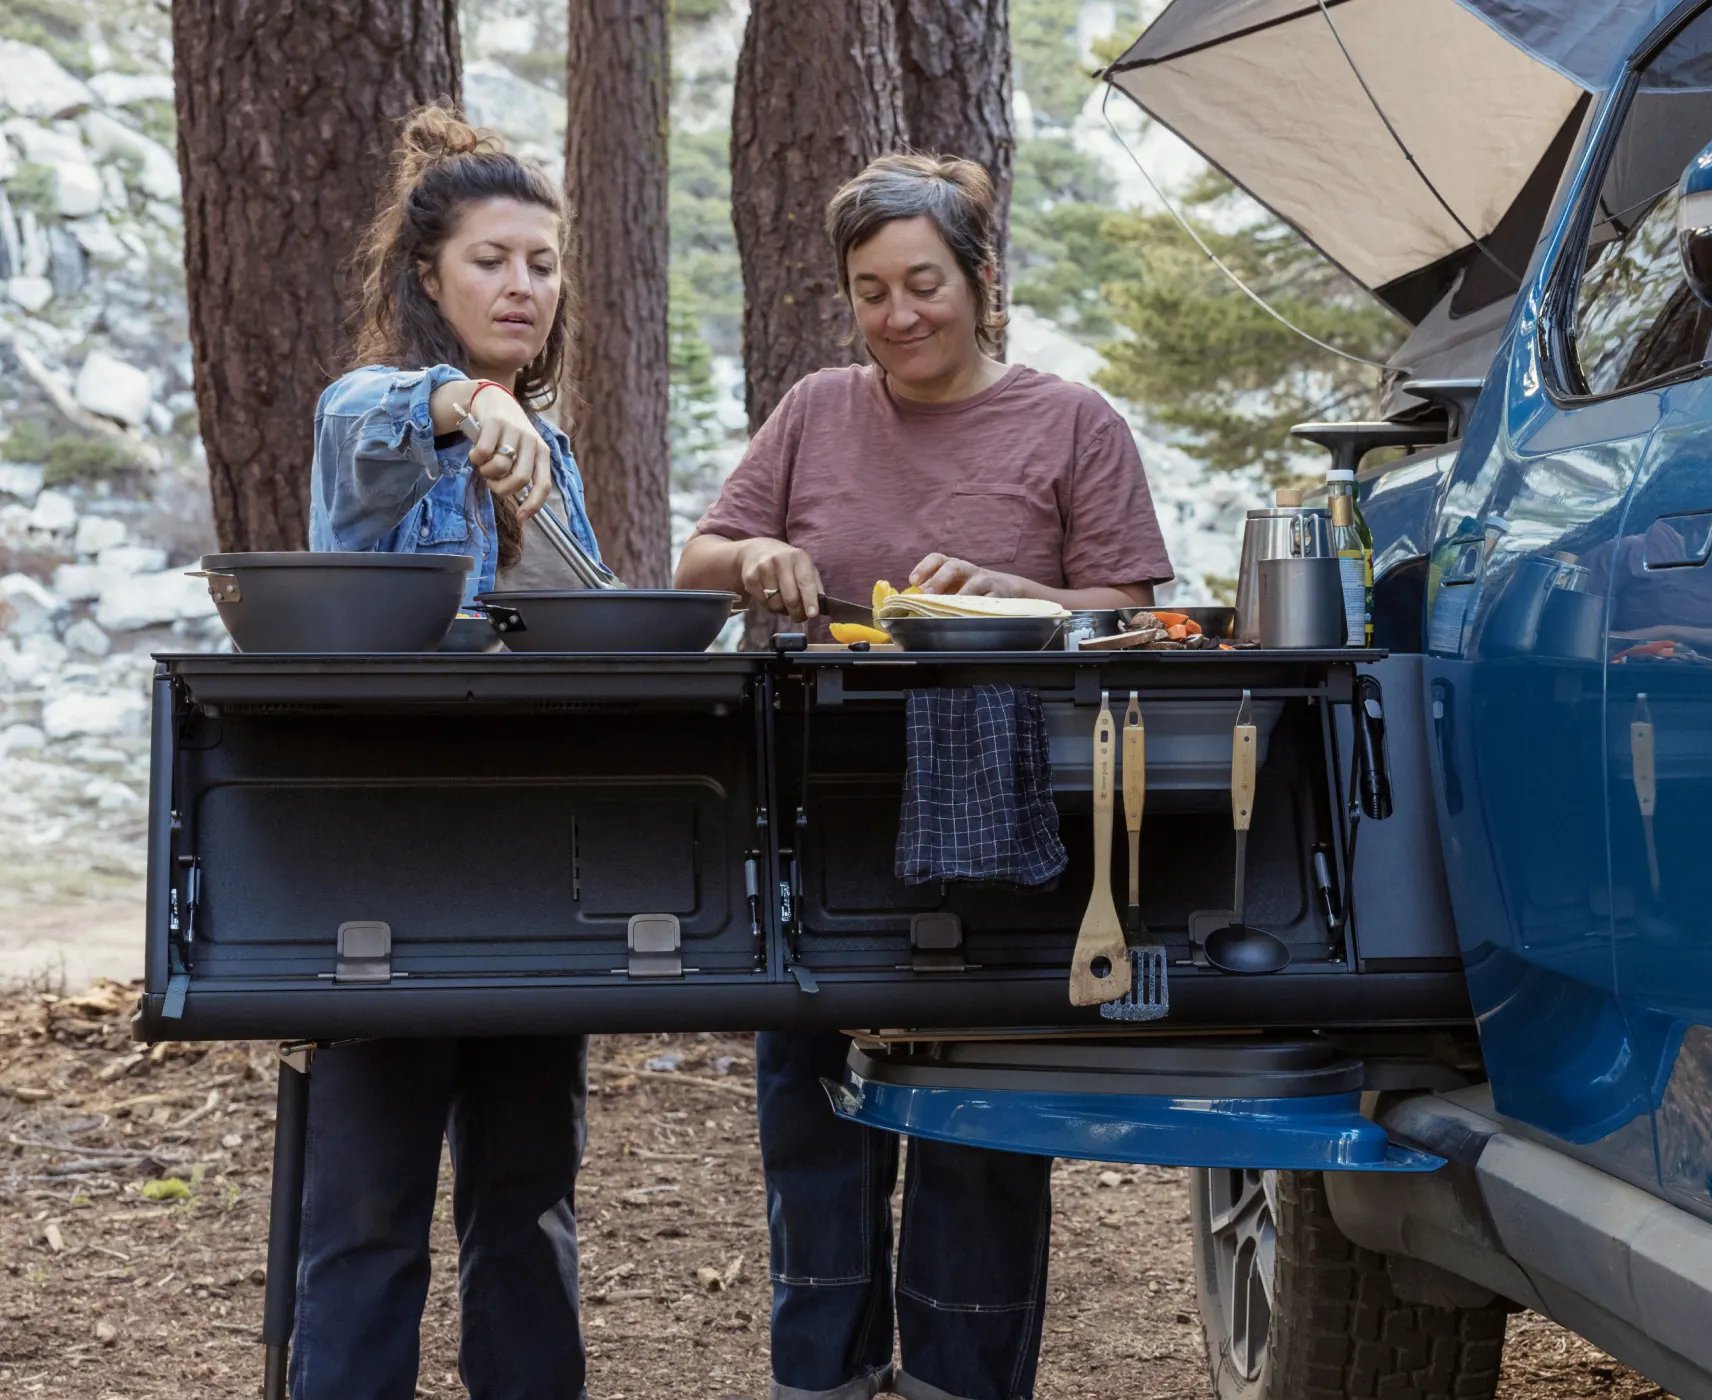 Rivian R1S Camp Kitchen Trademark Filed With the USPTO, Might Not